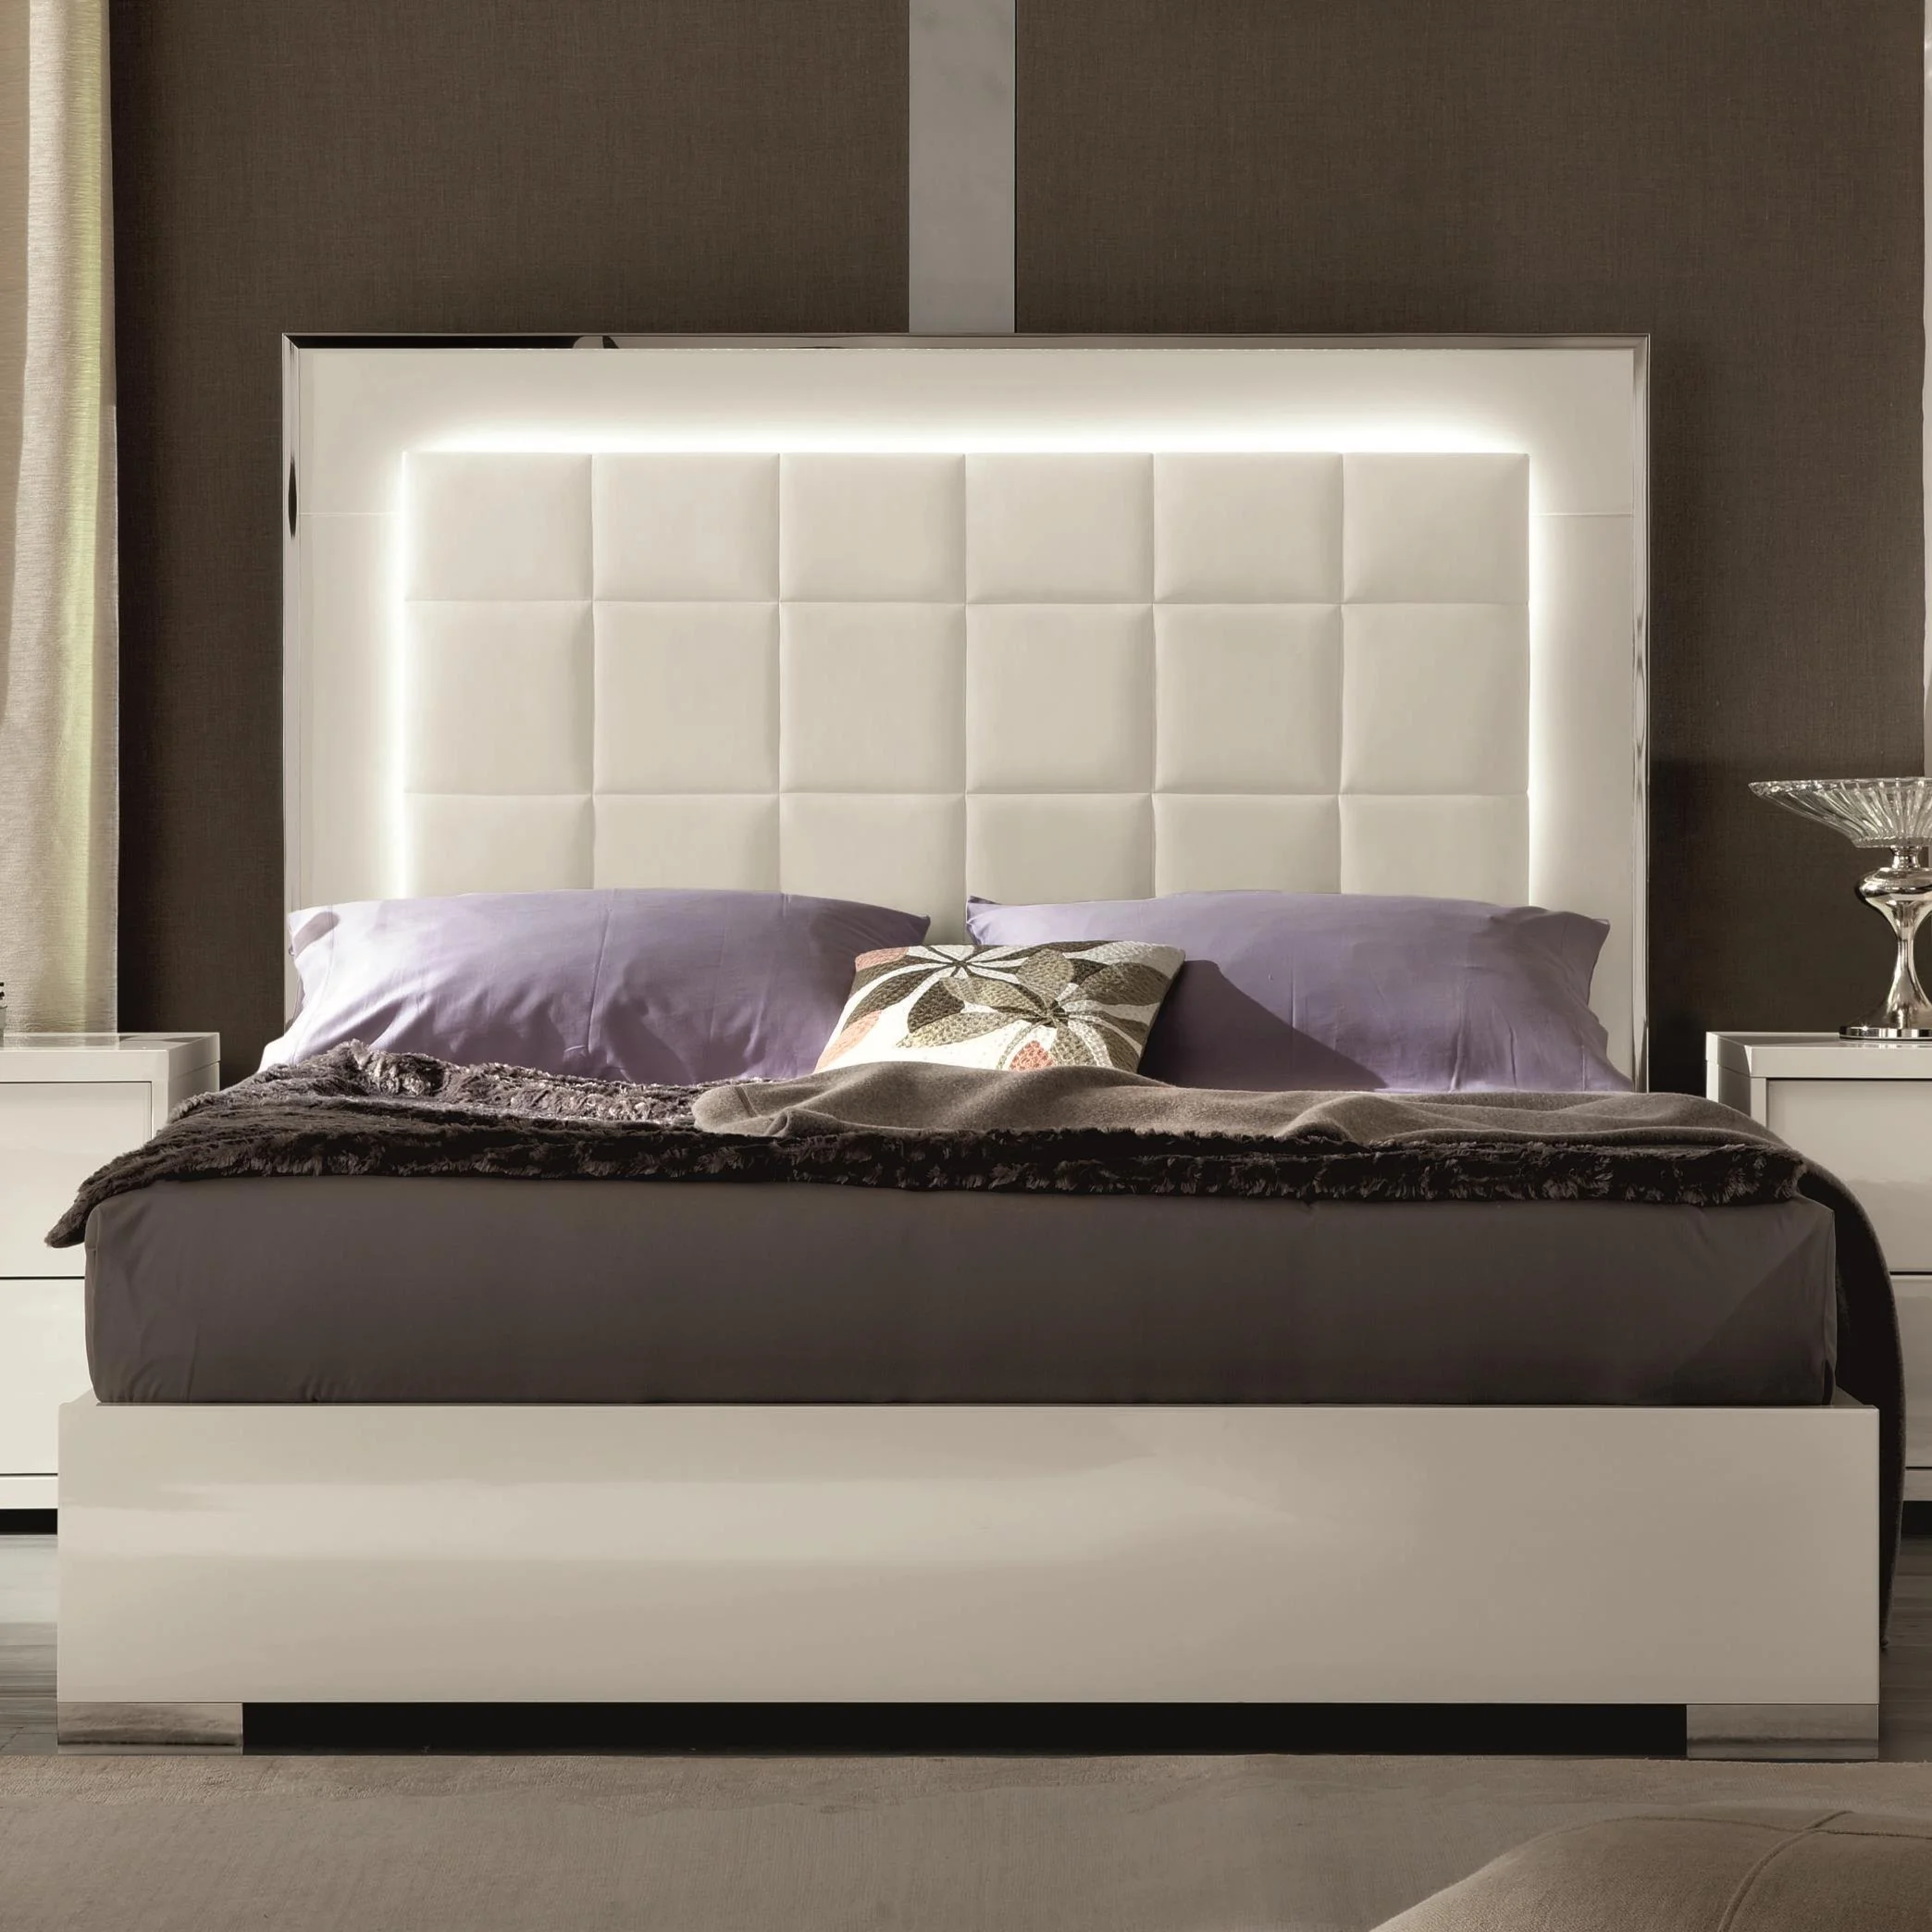 Alf Italia Imperia PJIE0250BI Queen Upholstered Bed with LED Lights and ...